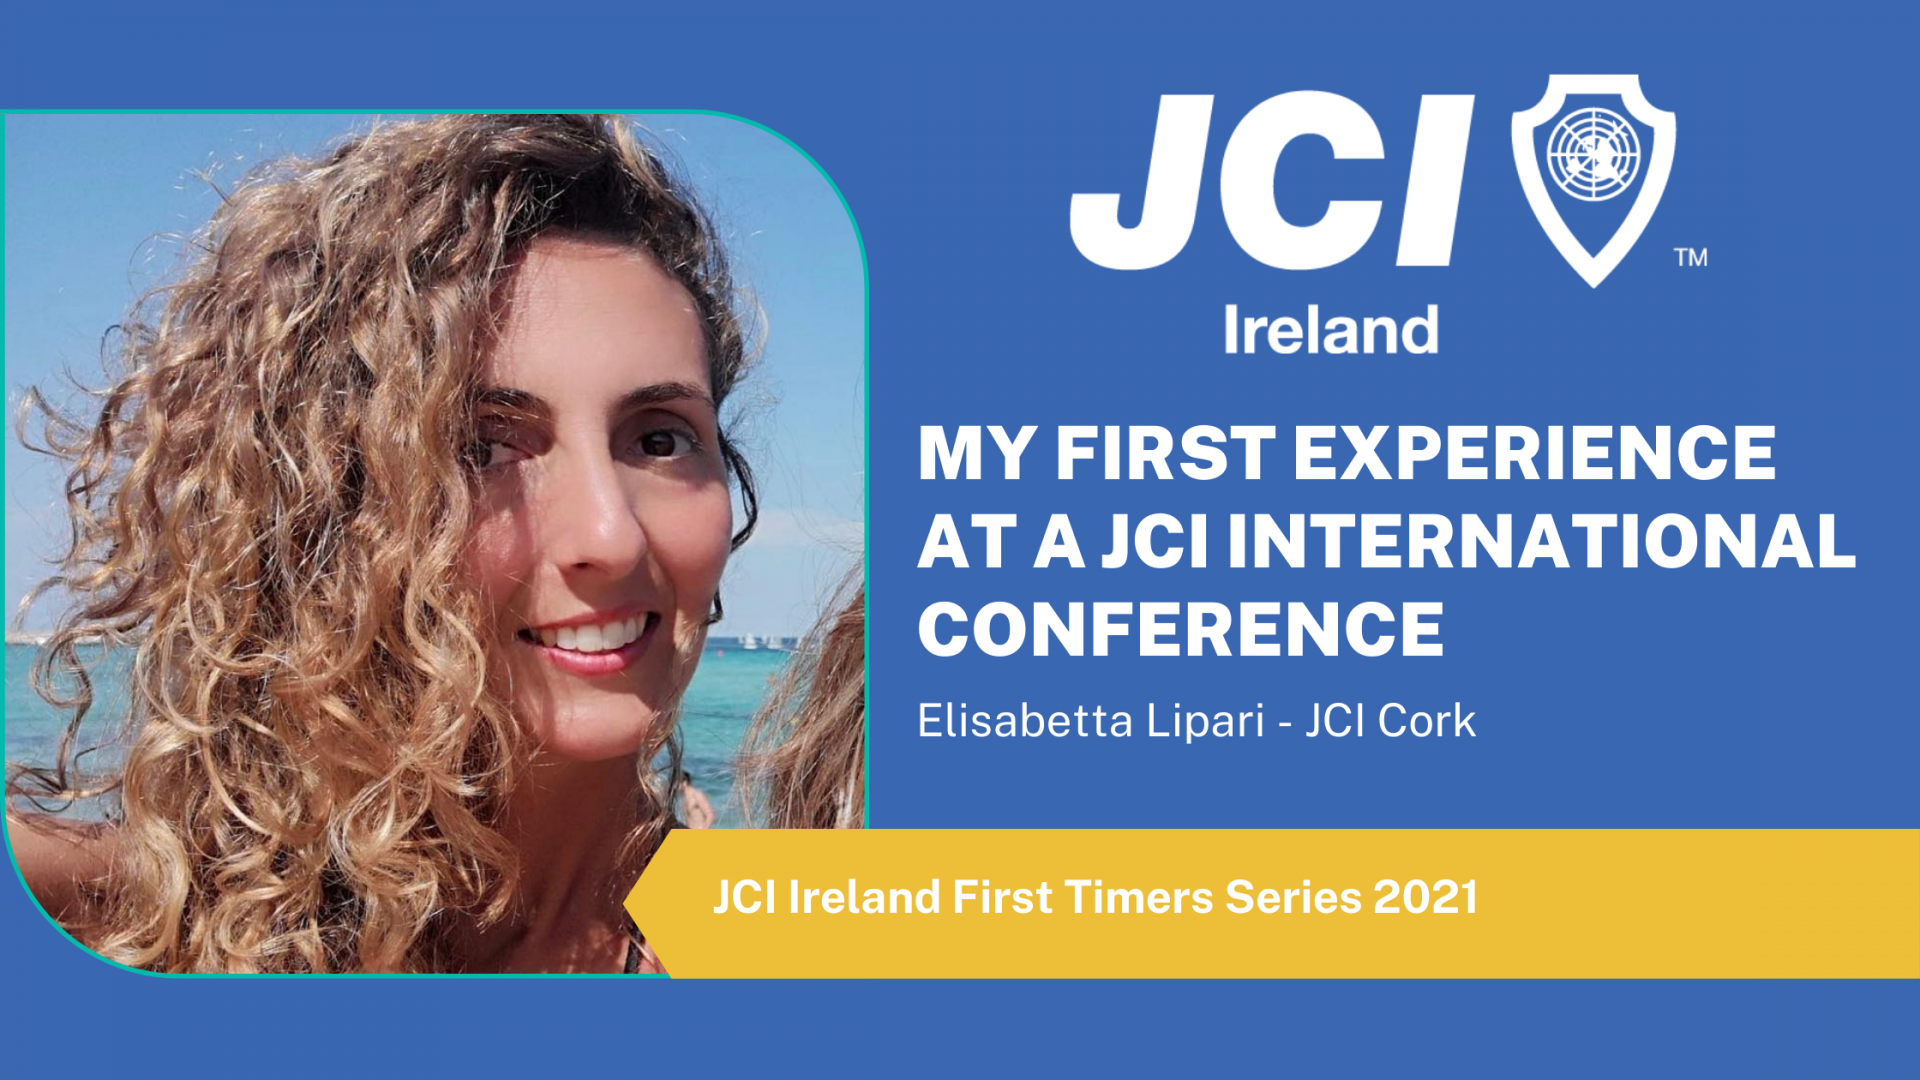 My first experience at a JCI international conference